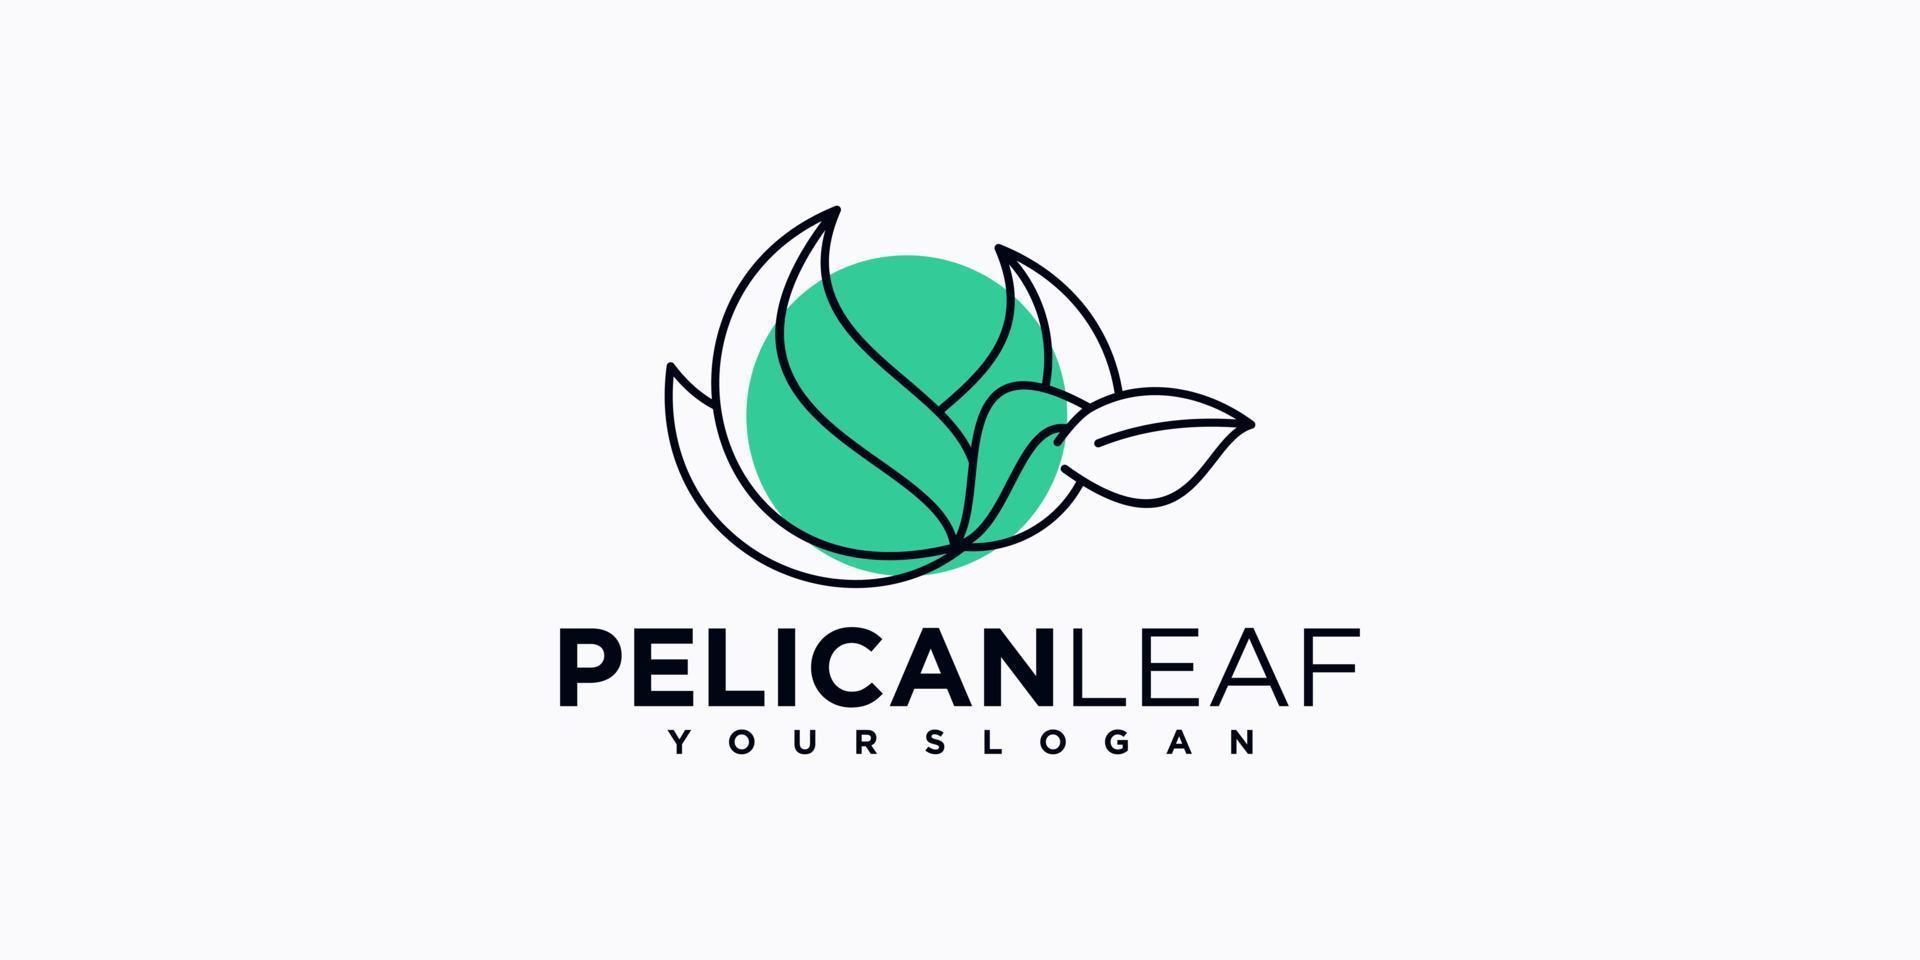 Pelican logo reference with leaf concept, for business vector